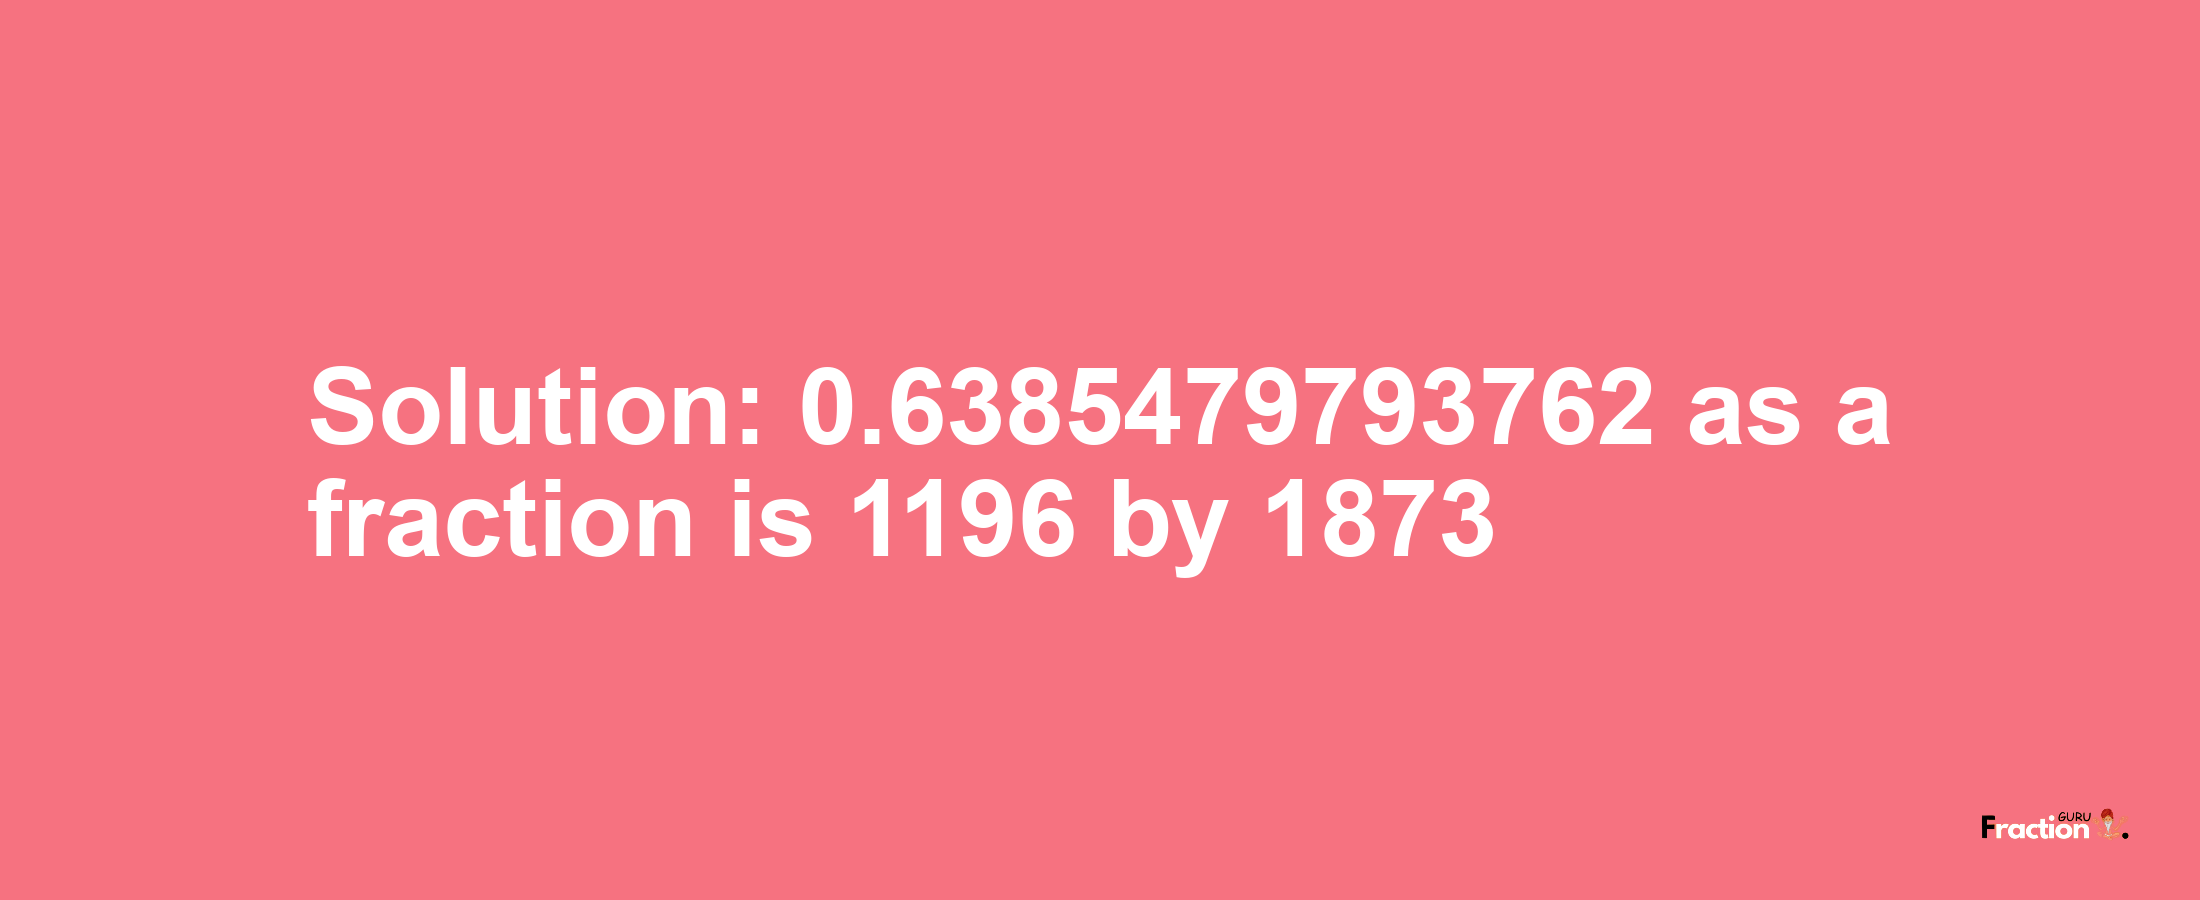 Solution:0.6385479793762 as a fraction is 1196/1873